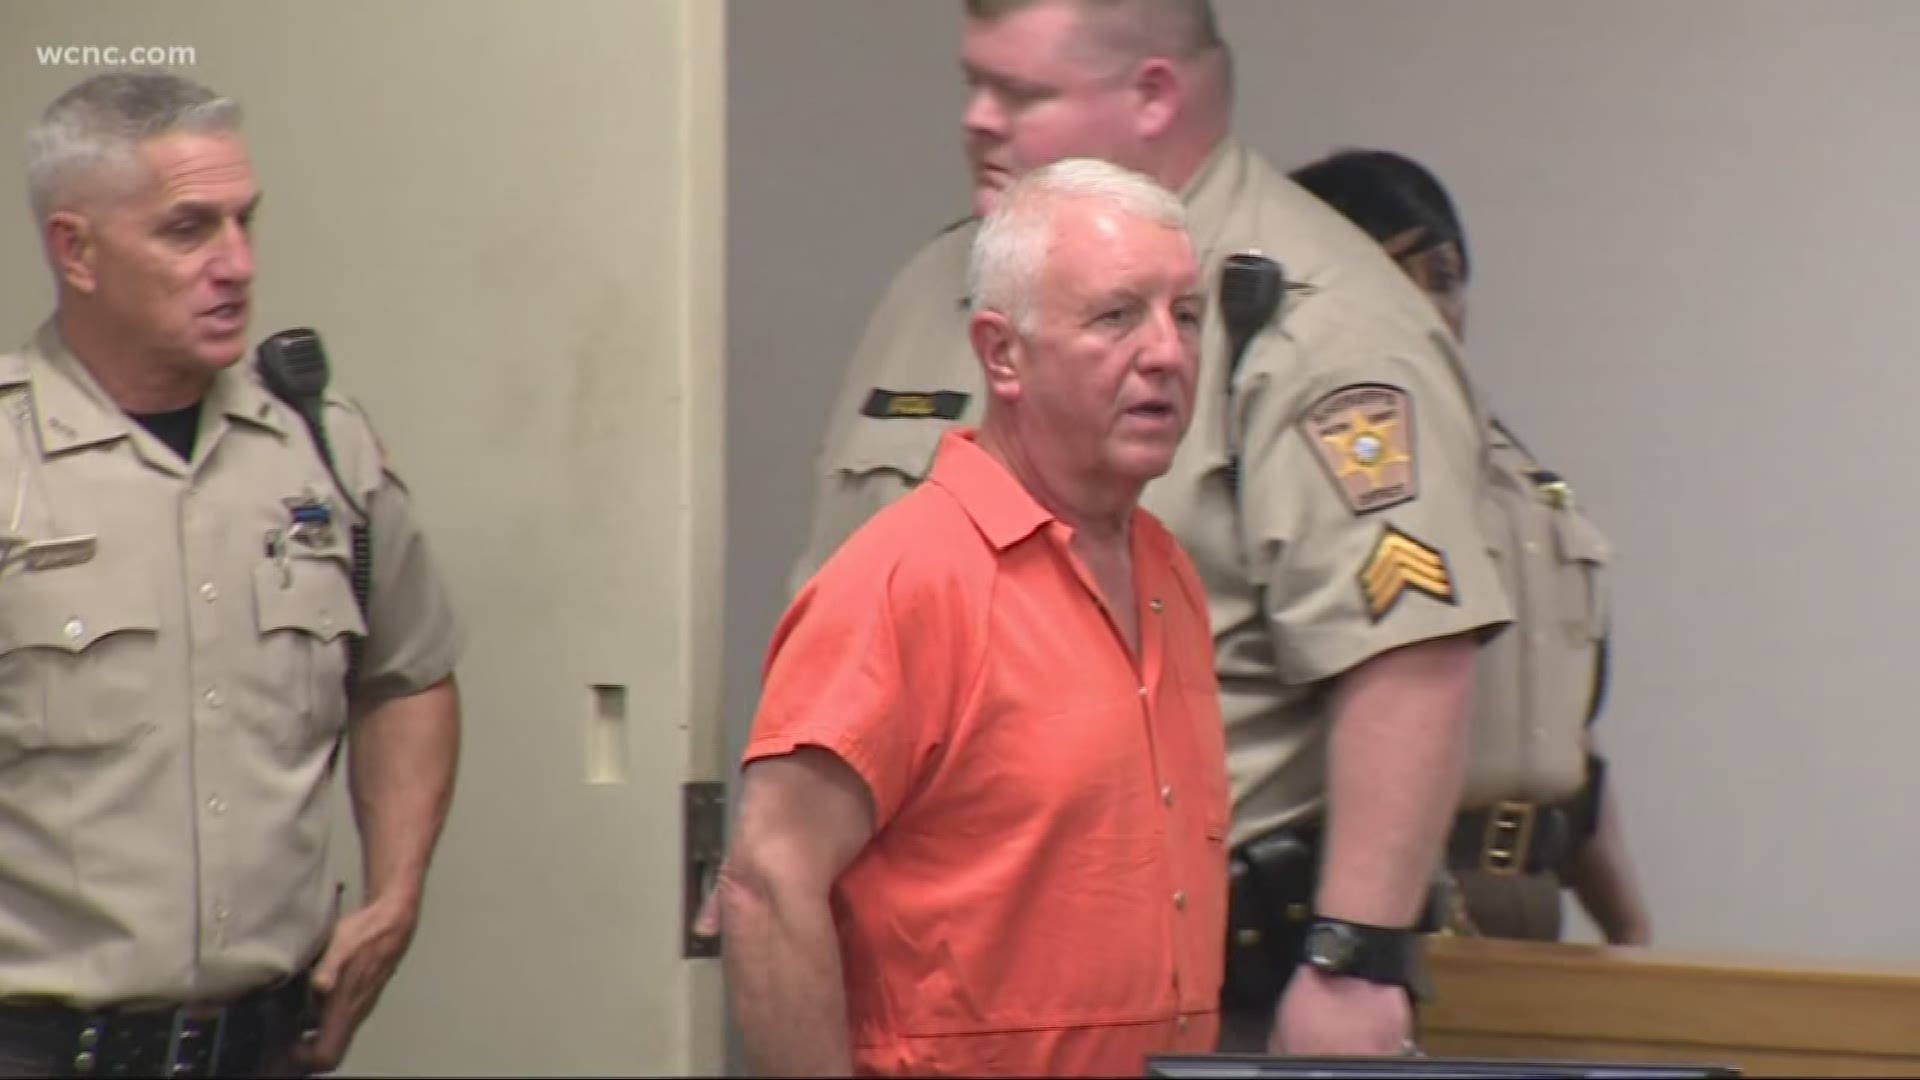 A Gaston County man accused of intentionally crashing his car into a restaurant and killing two people, including his daughter, is expected to appear in court Monday.